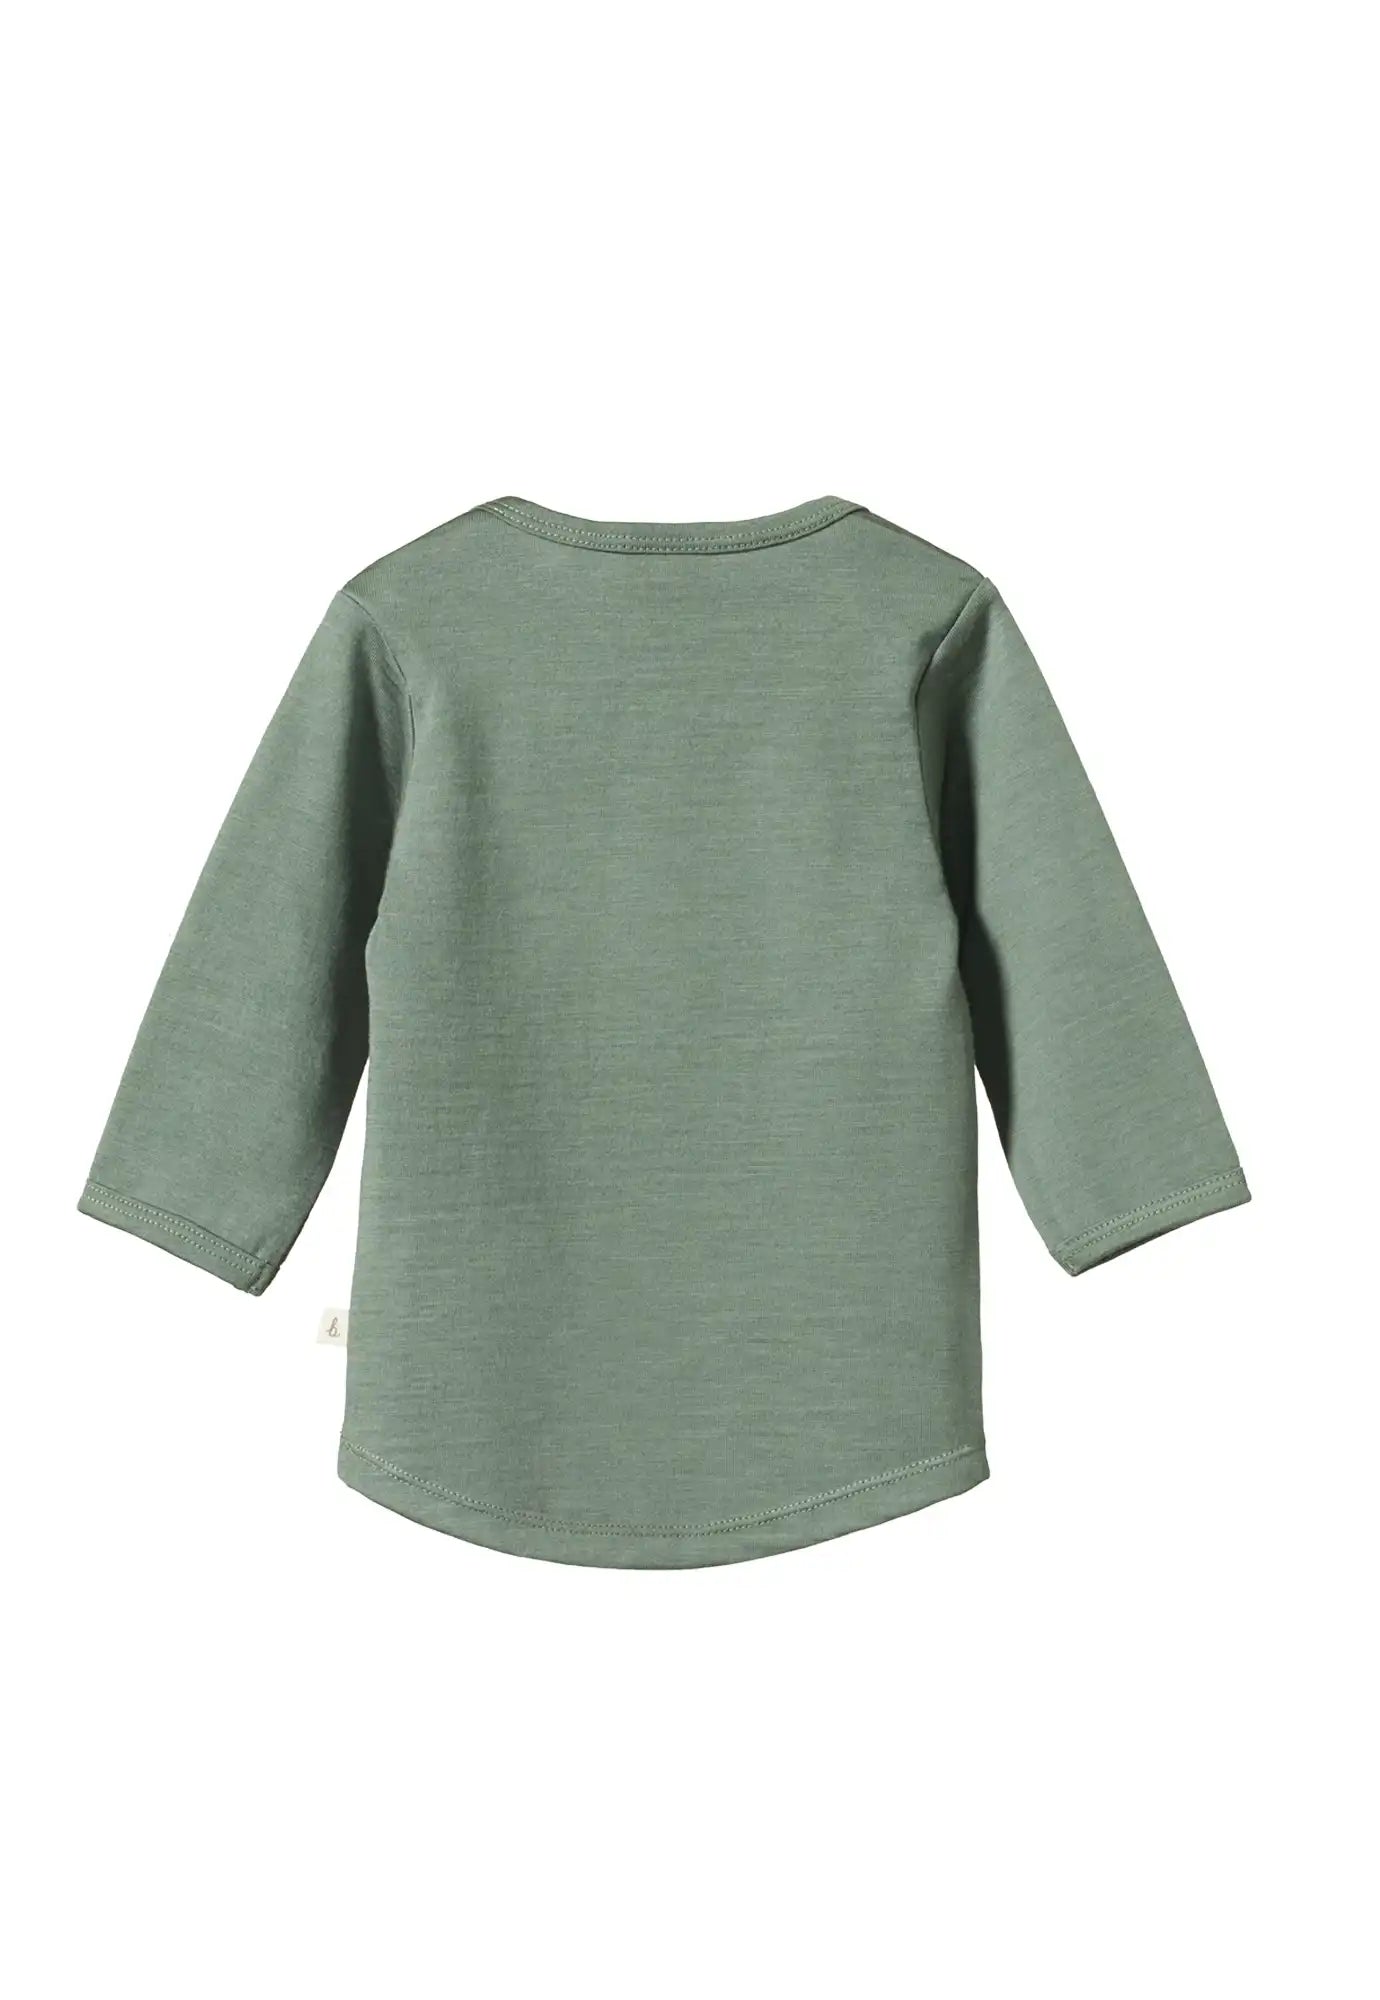 nature baby - essential tee - nettle